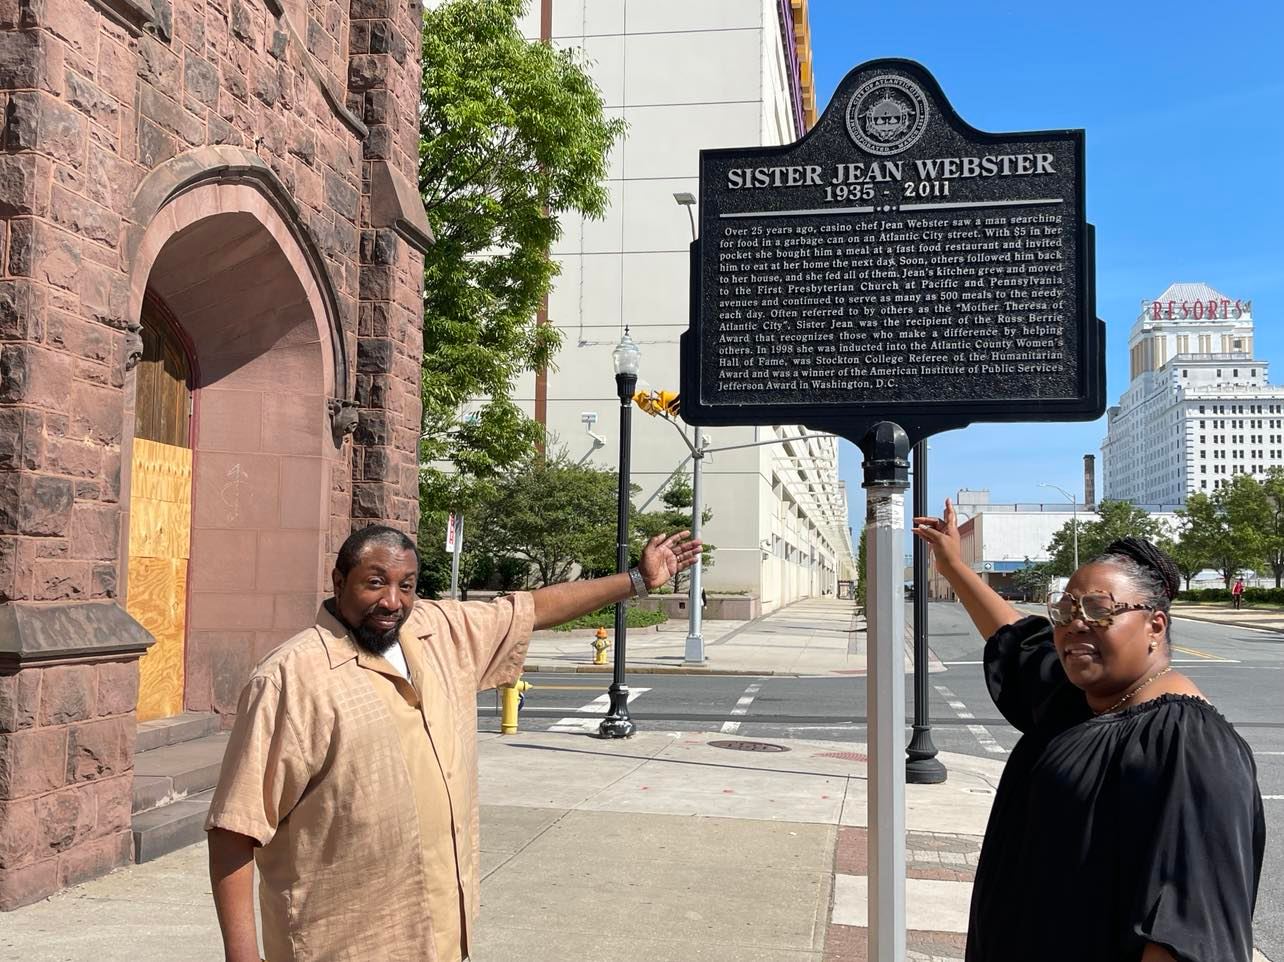 Bishop Charles Lyles and Lonniyell also known as "The Community" stand in front of marker celebrating Jean Webster who at one time fed more than 600 people per day at the Victory First Presbyterian Deliverance Church. Photo credit: Mark Tyler